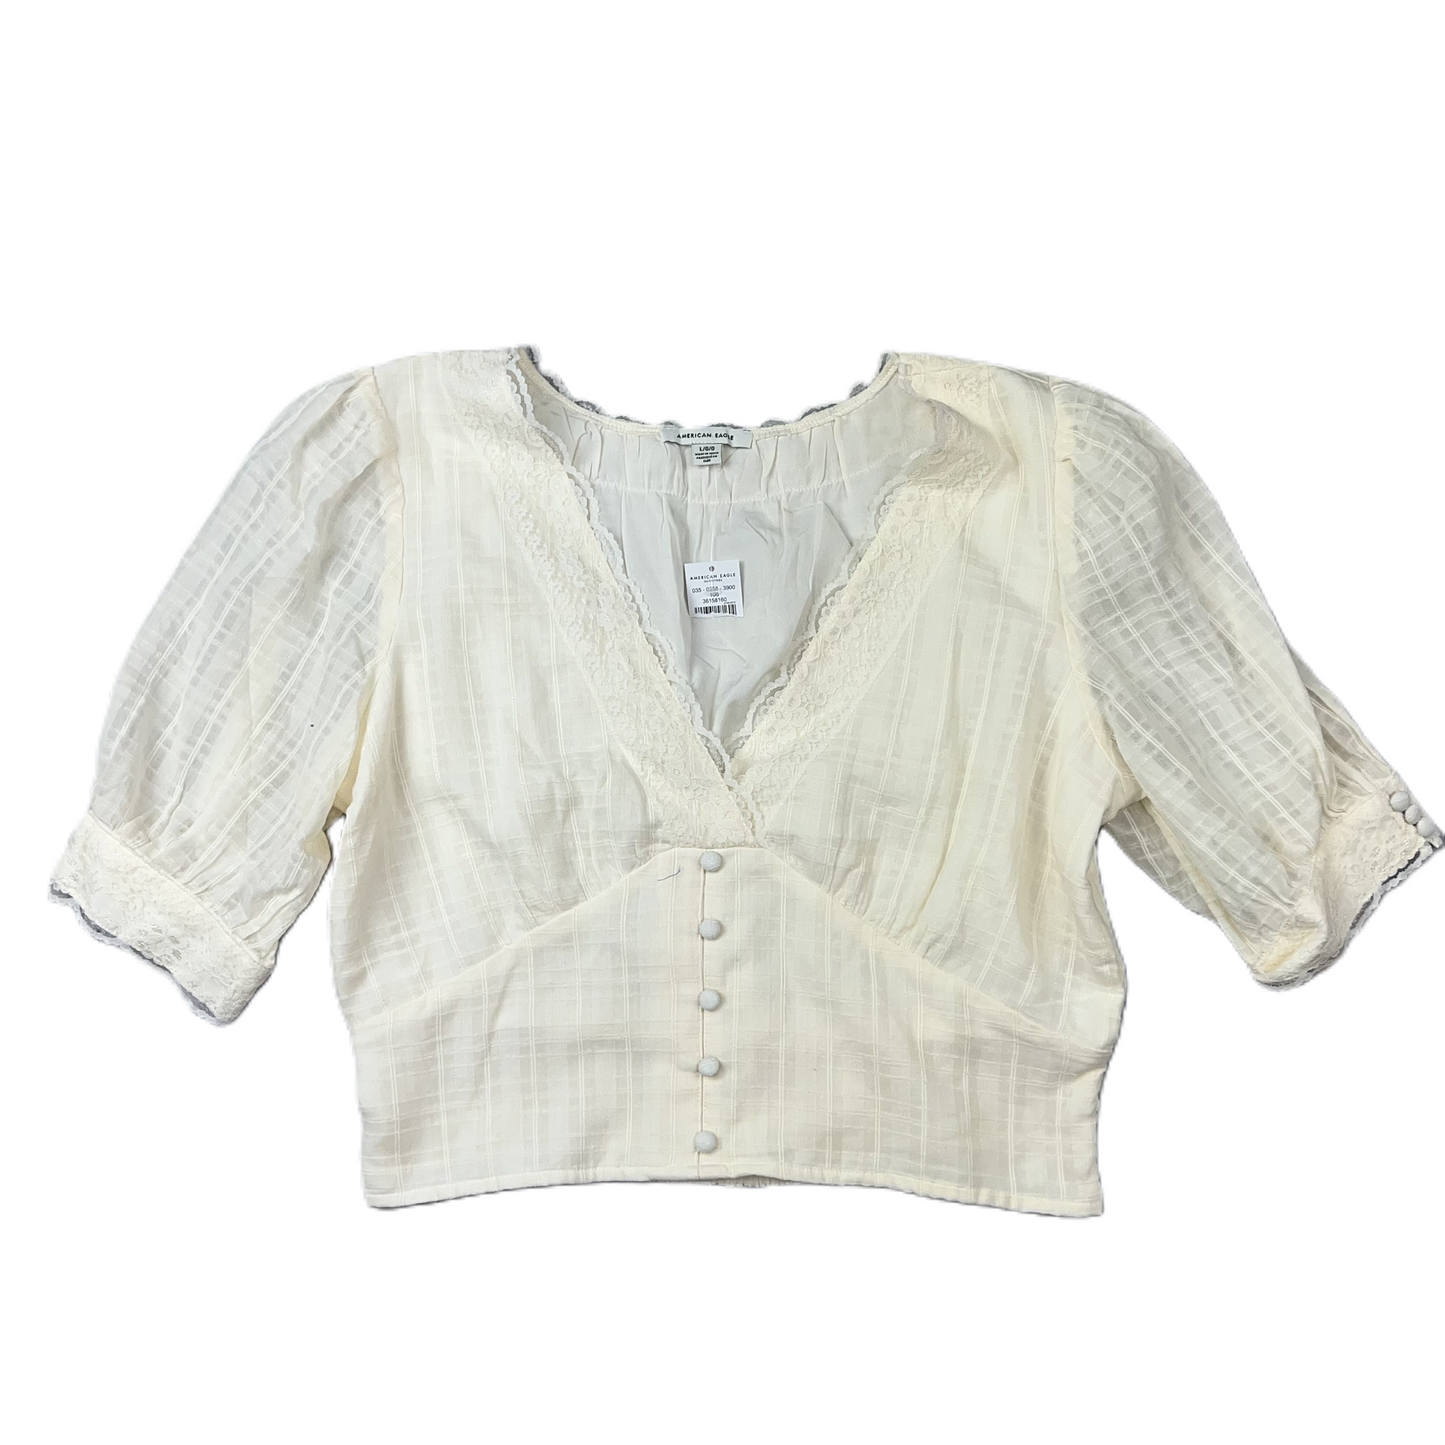 Cream Top 3/4 Sleeve By American Eagle, Size: L